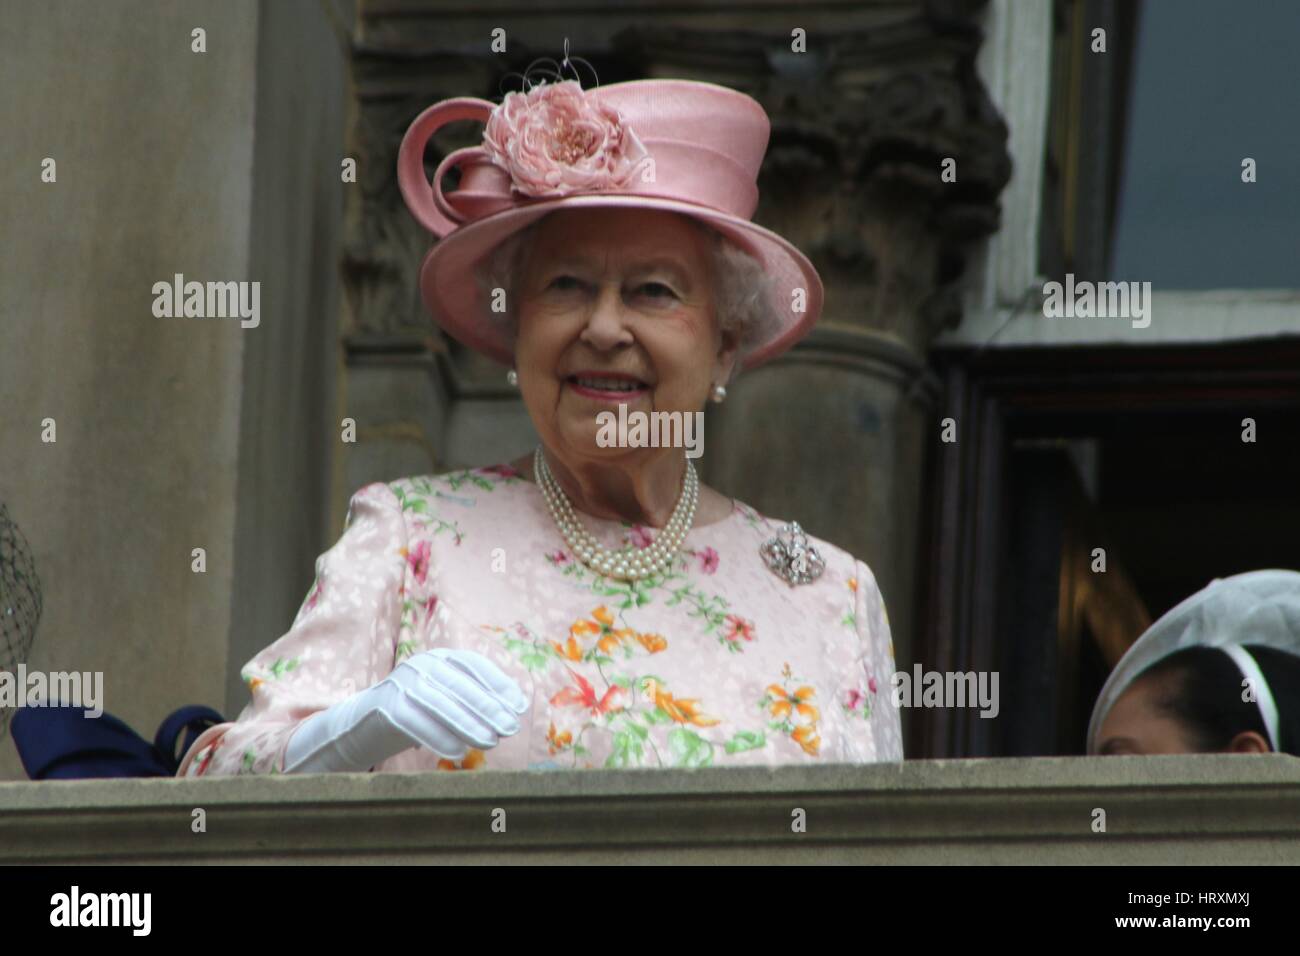 HM Queen Elizabeth II and HRH the Duke of Edinburgh visit Liverpool, Merseyside. They arrive on the Royal Train at Liverpool Lime Street Station 2016 Stock Photo